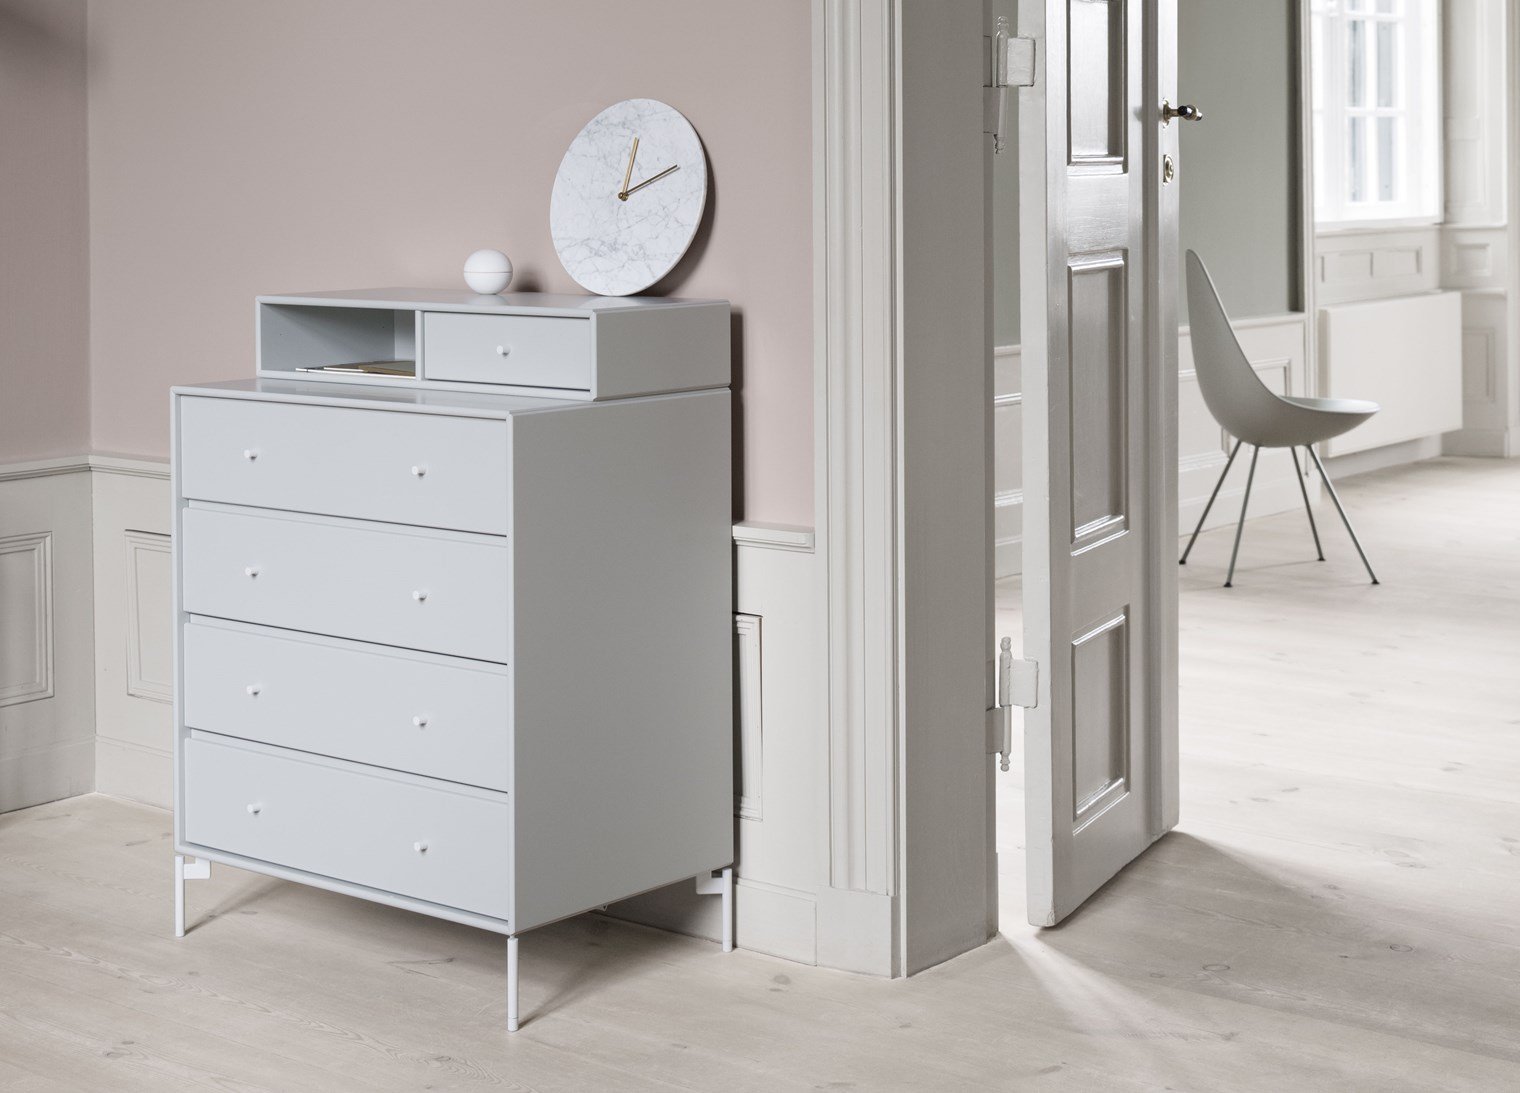 Montana Keep Bre of Drawers With Ben, Oyster Grey/Chrome Mat